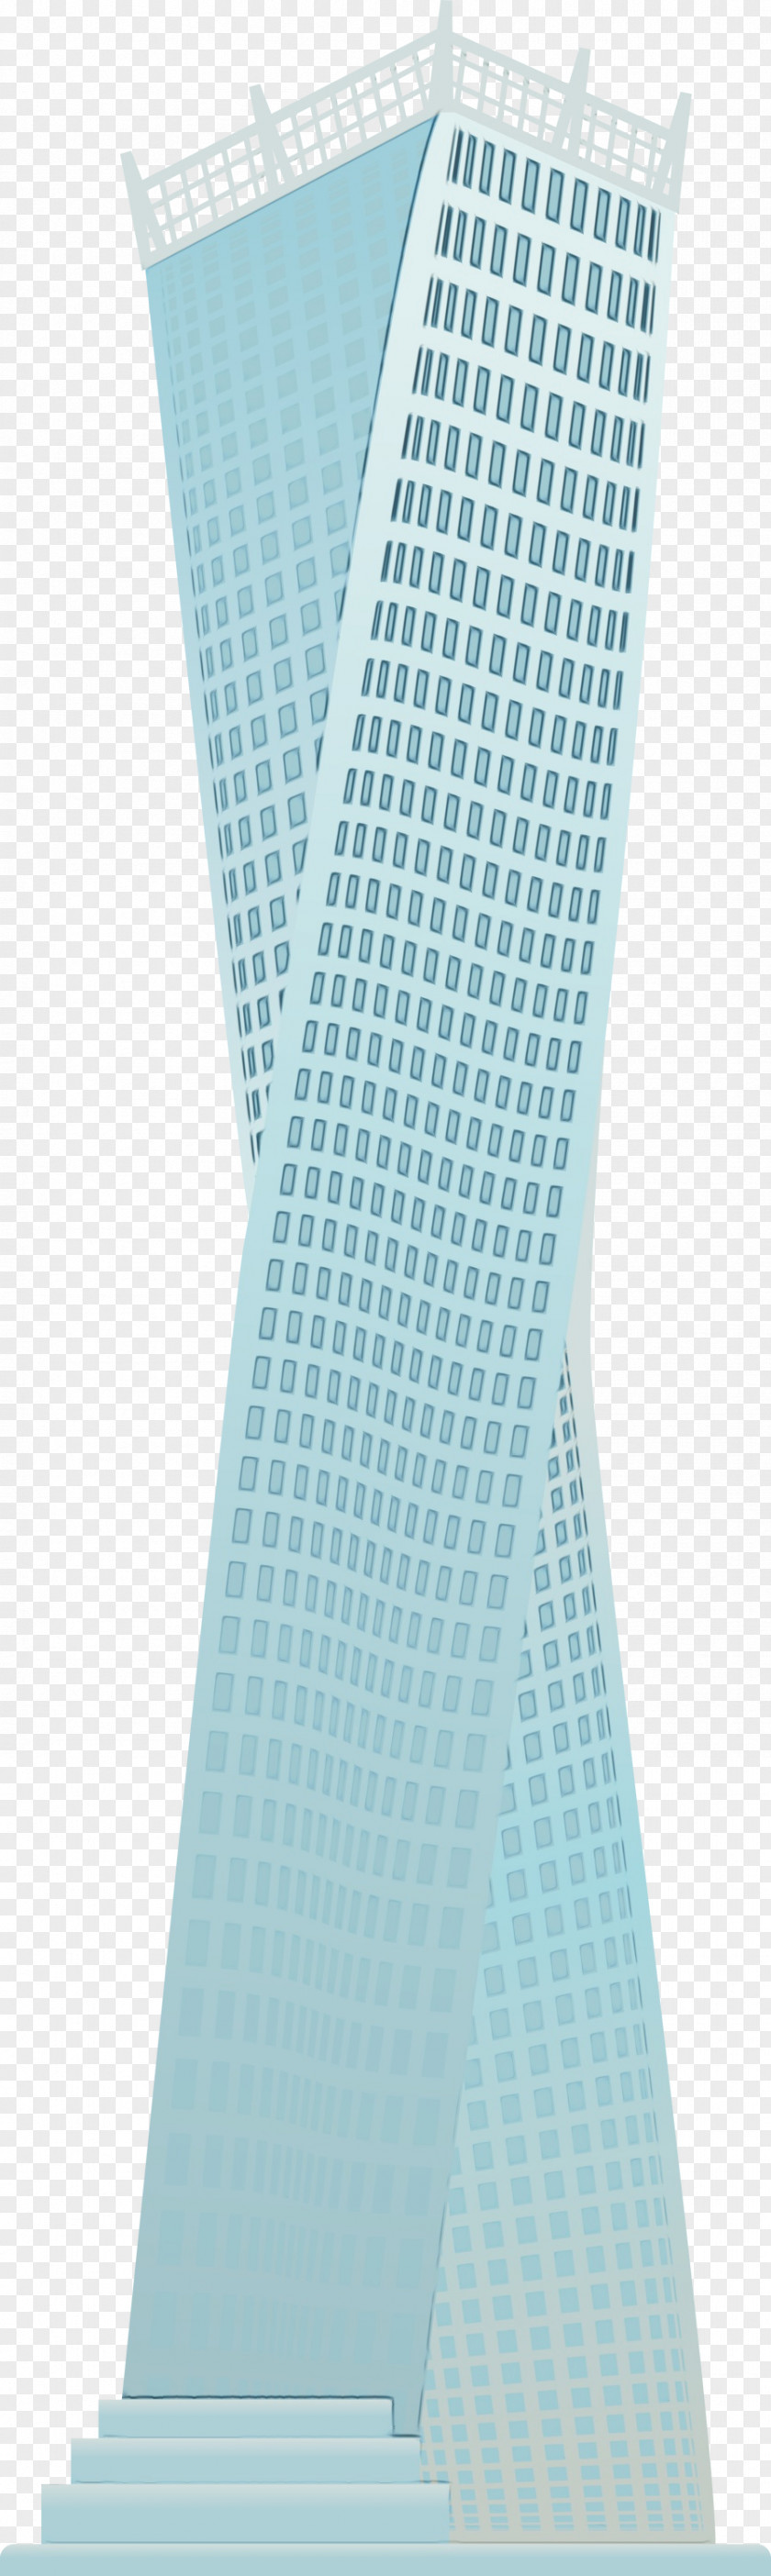 Skyscraper Architecture High-rise Building Angle Line PNG